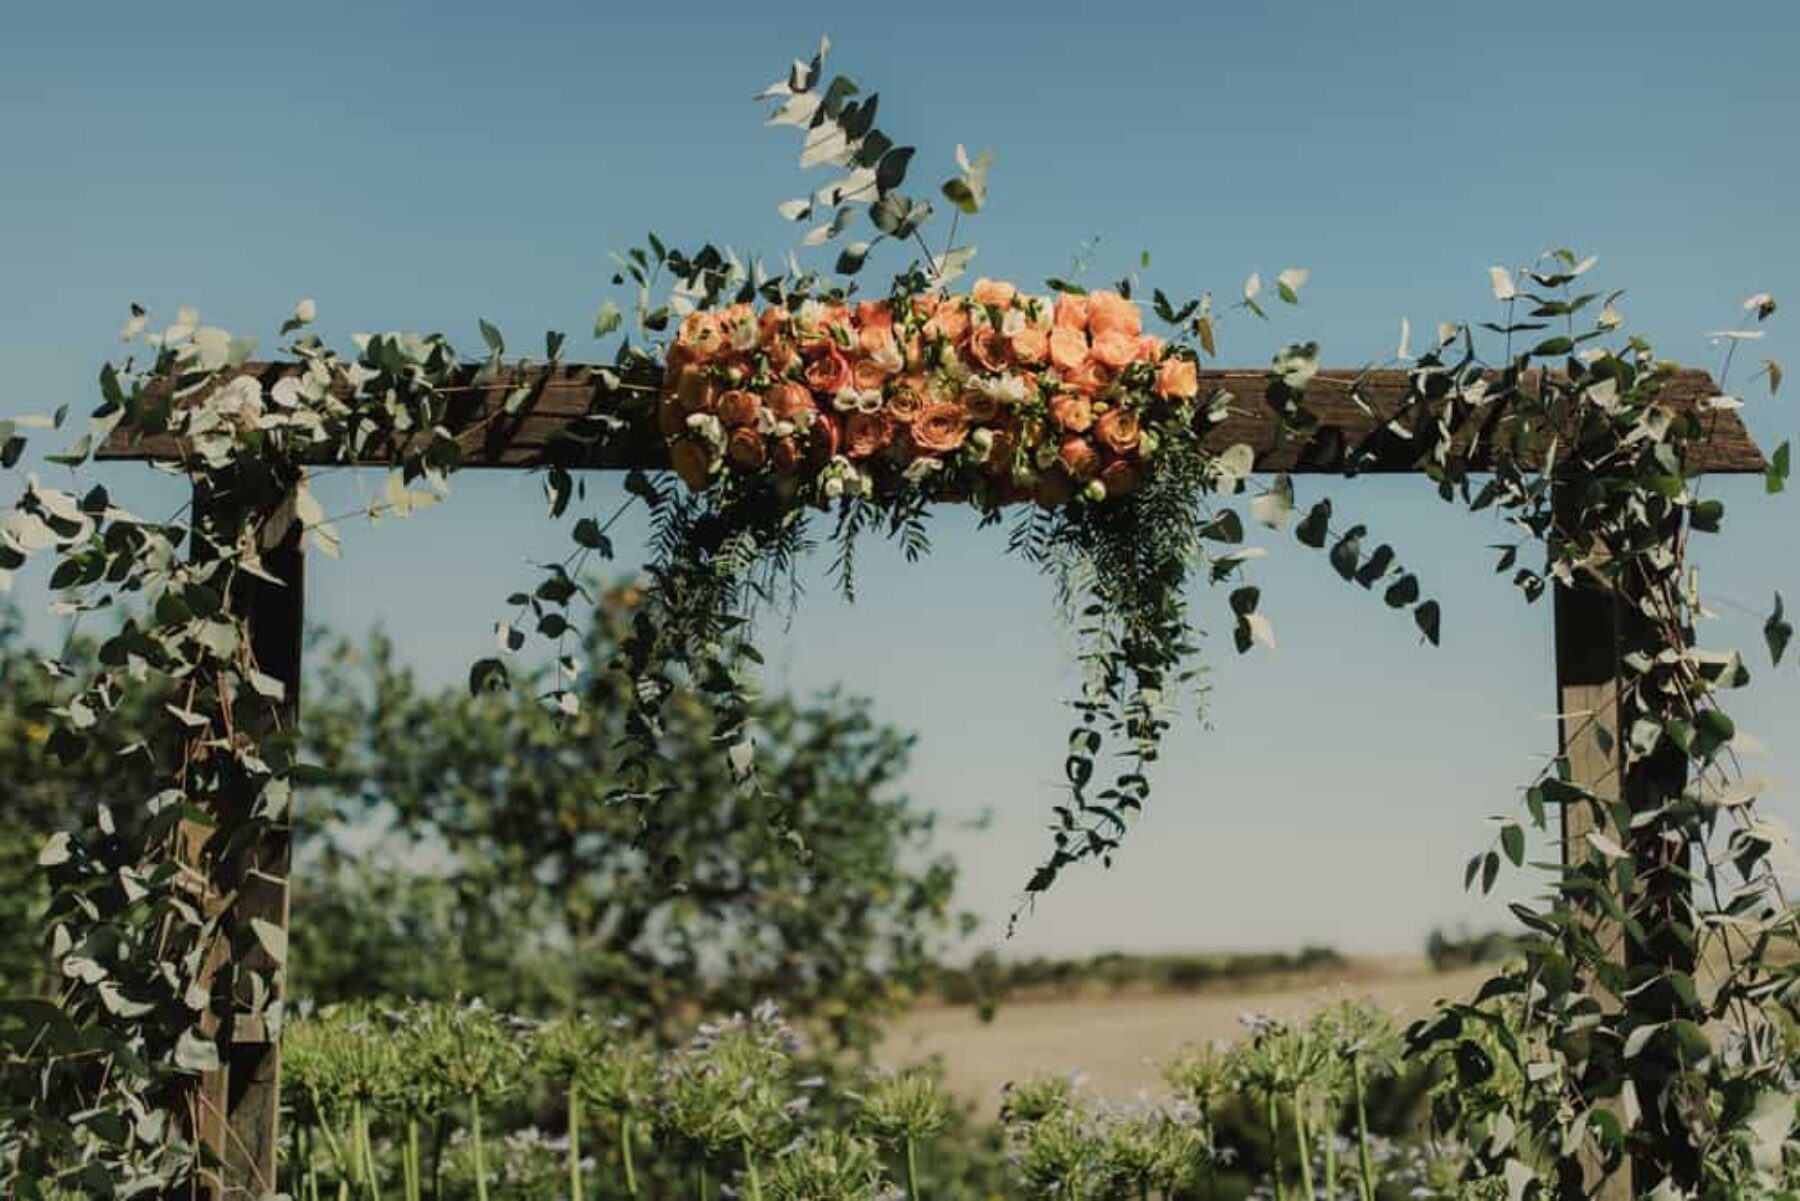 DIY timber arch with flowers